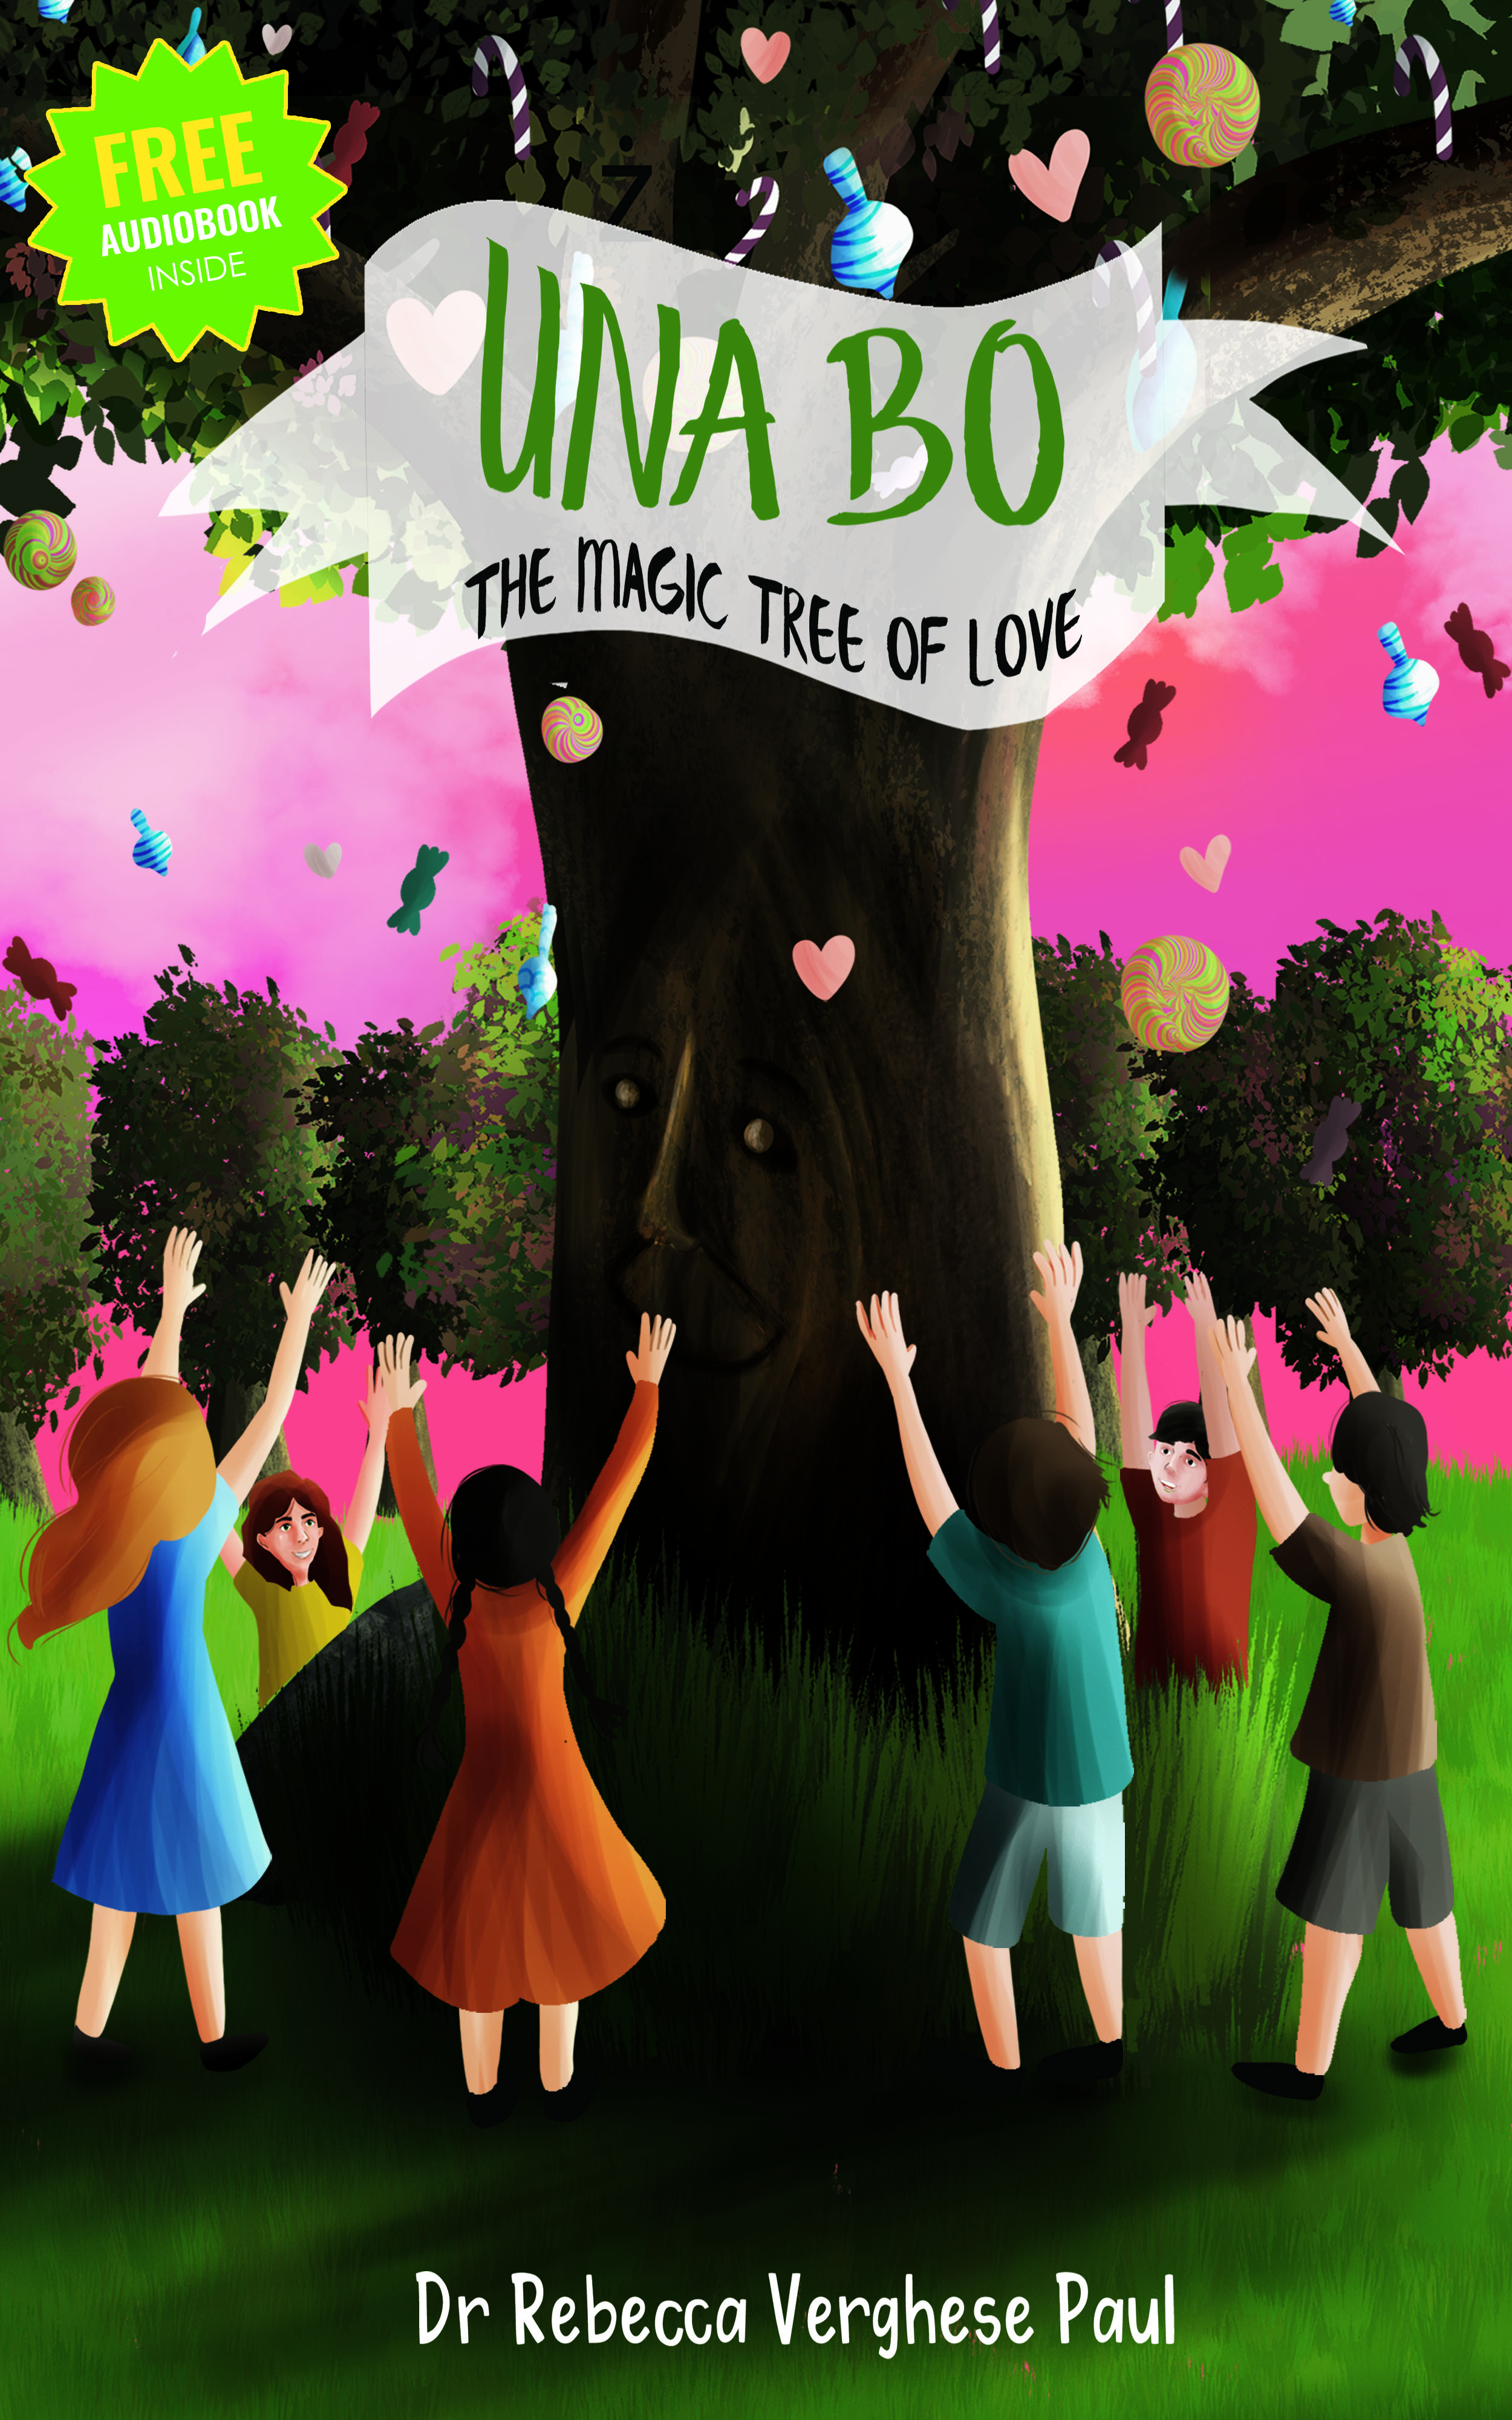 FREE: Una Bo the Magic Tree of Love by Dr Rebecca Verghese Paul